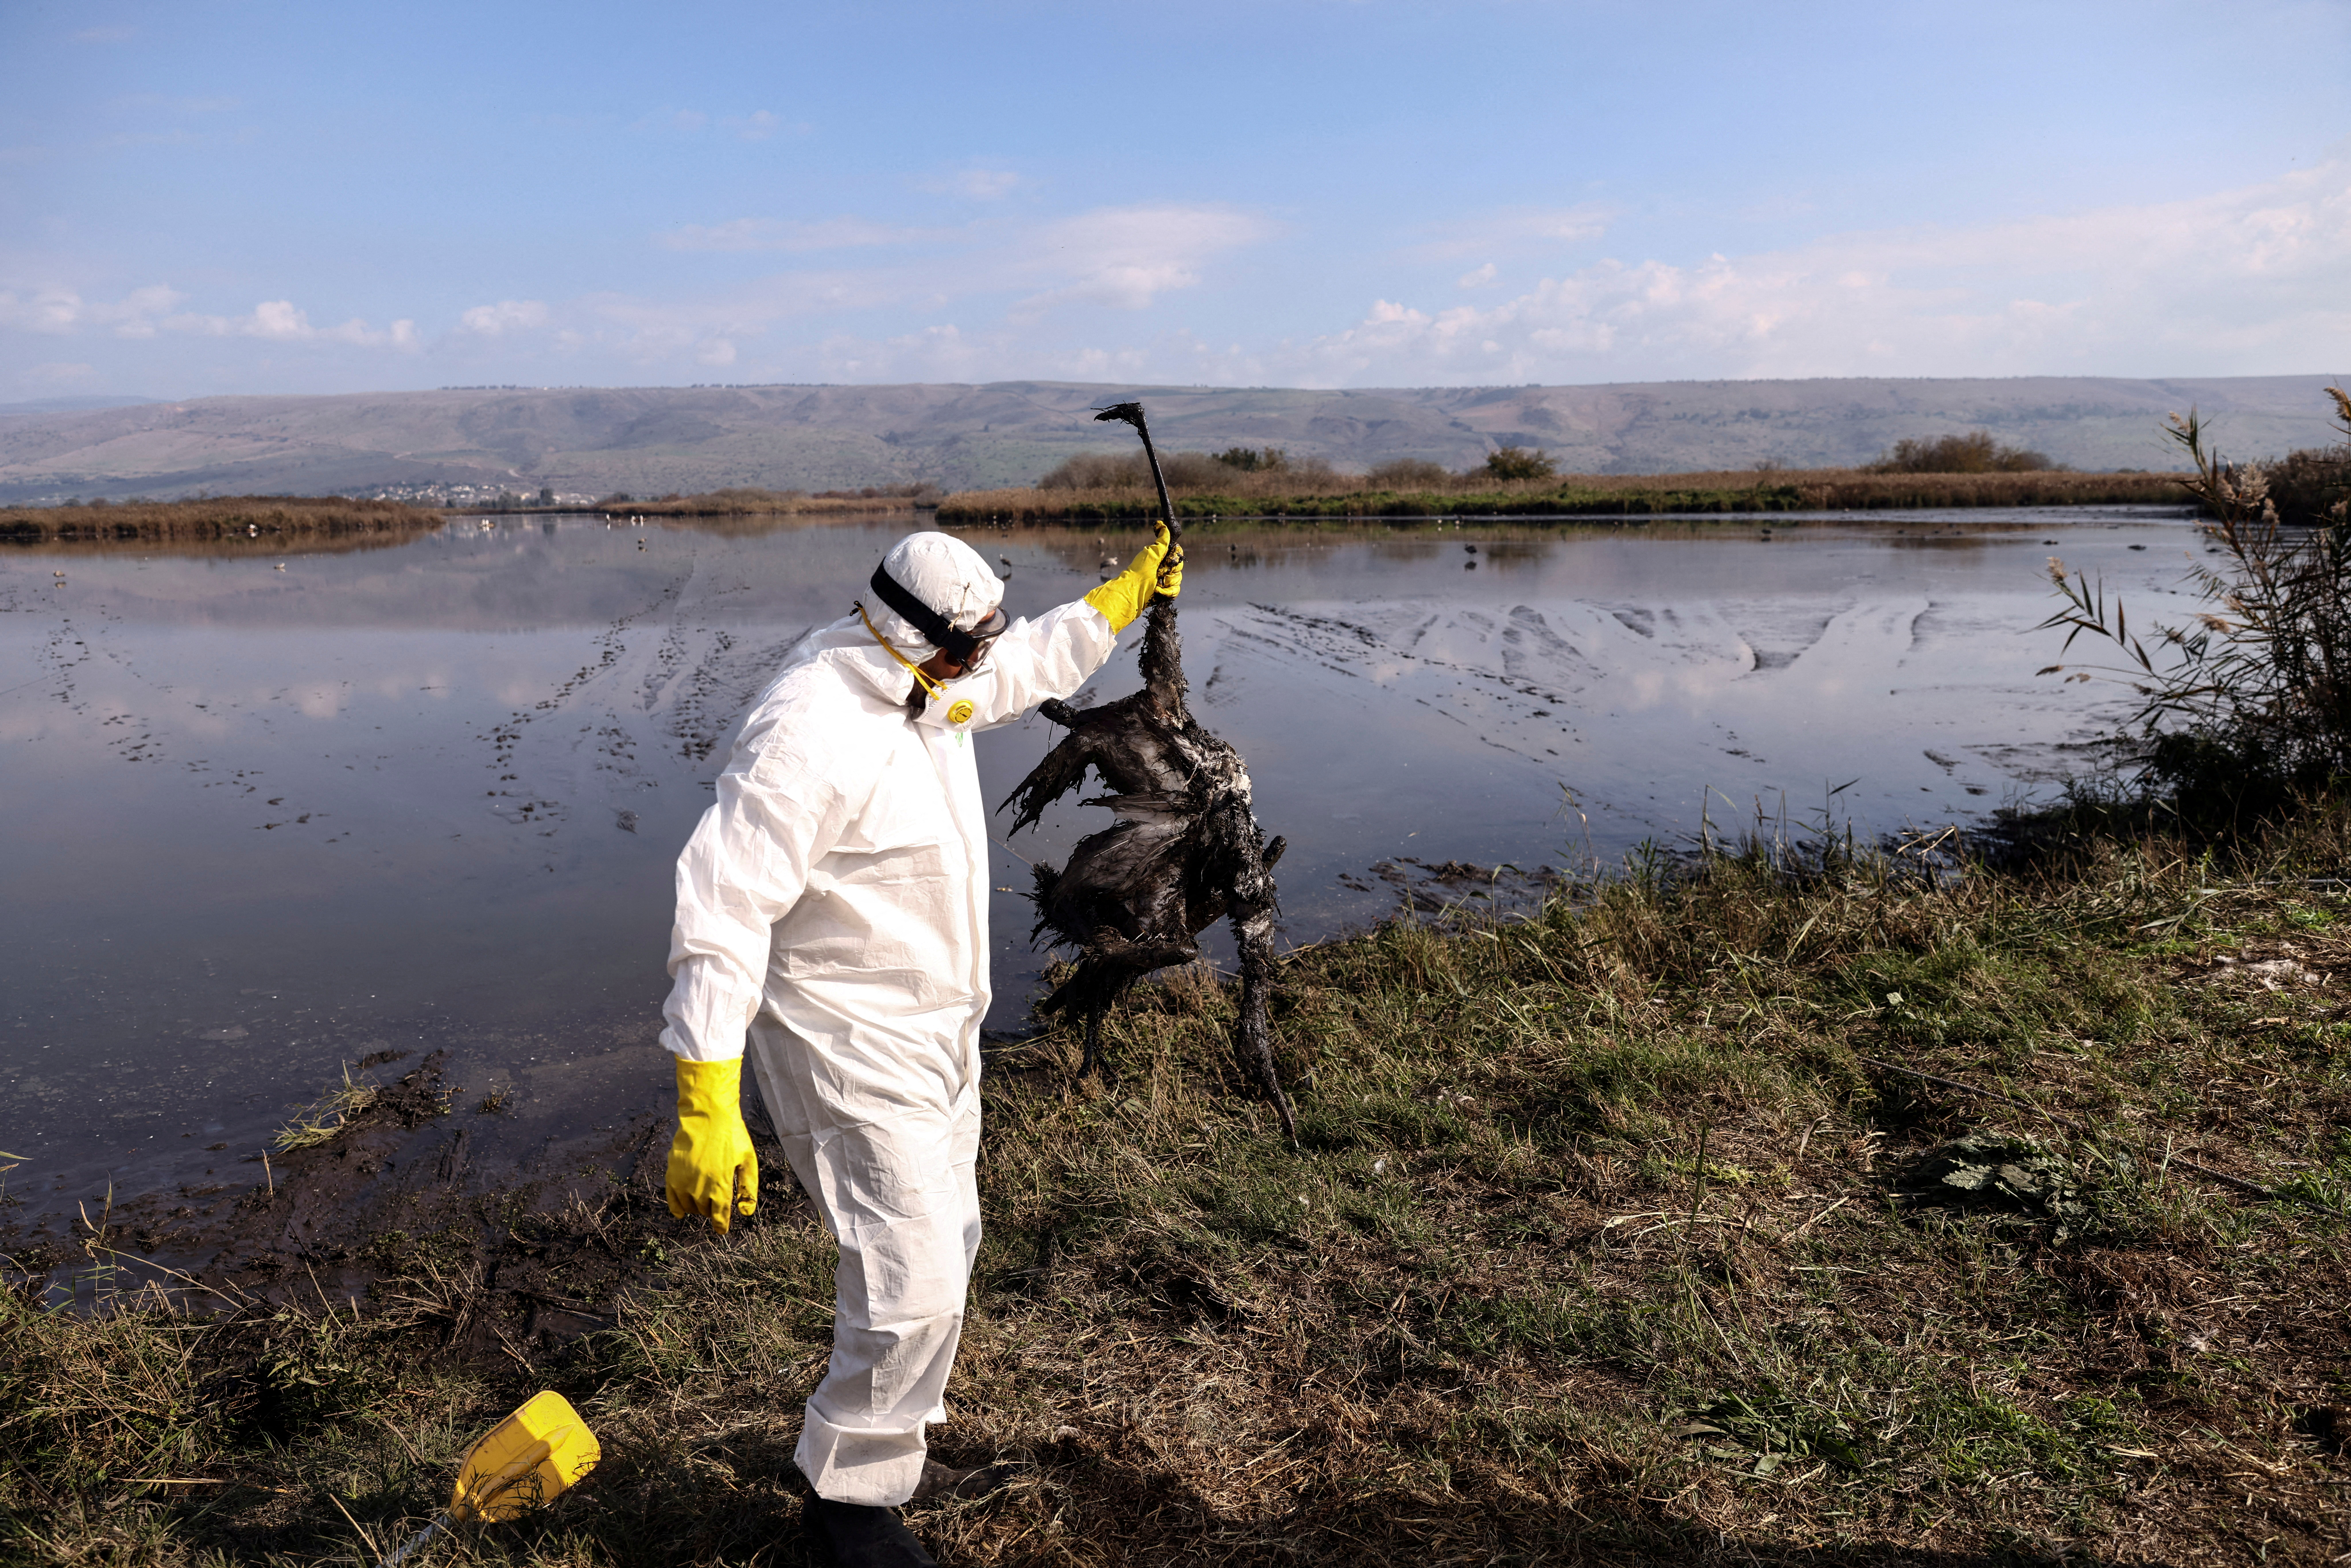 A worker on behalf of the Ministry of Agriculture and Rural Development holds up a crane that died following an outbreak of avian flu in the lake of a nature reserve, an important bird migration destination in the Hula Valley, northern Israel, January 2, 2022. REUTERS/Ronen Zvulun